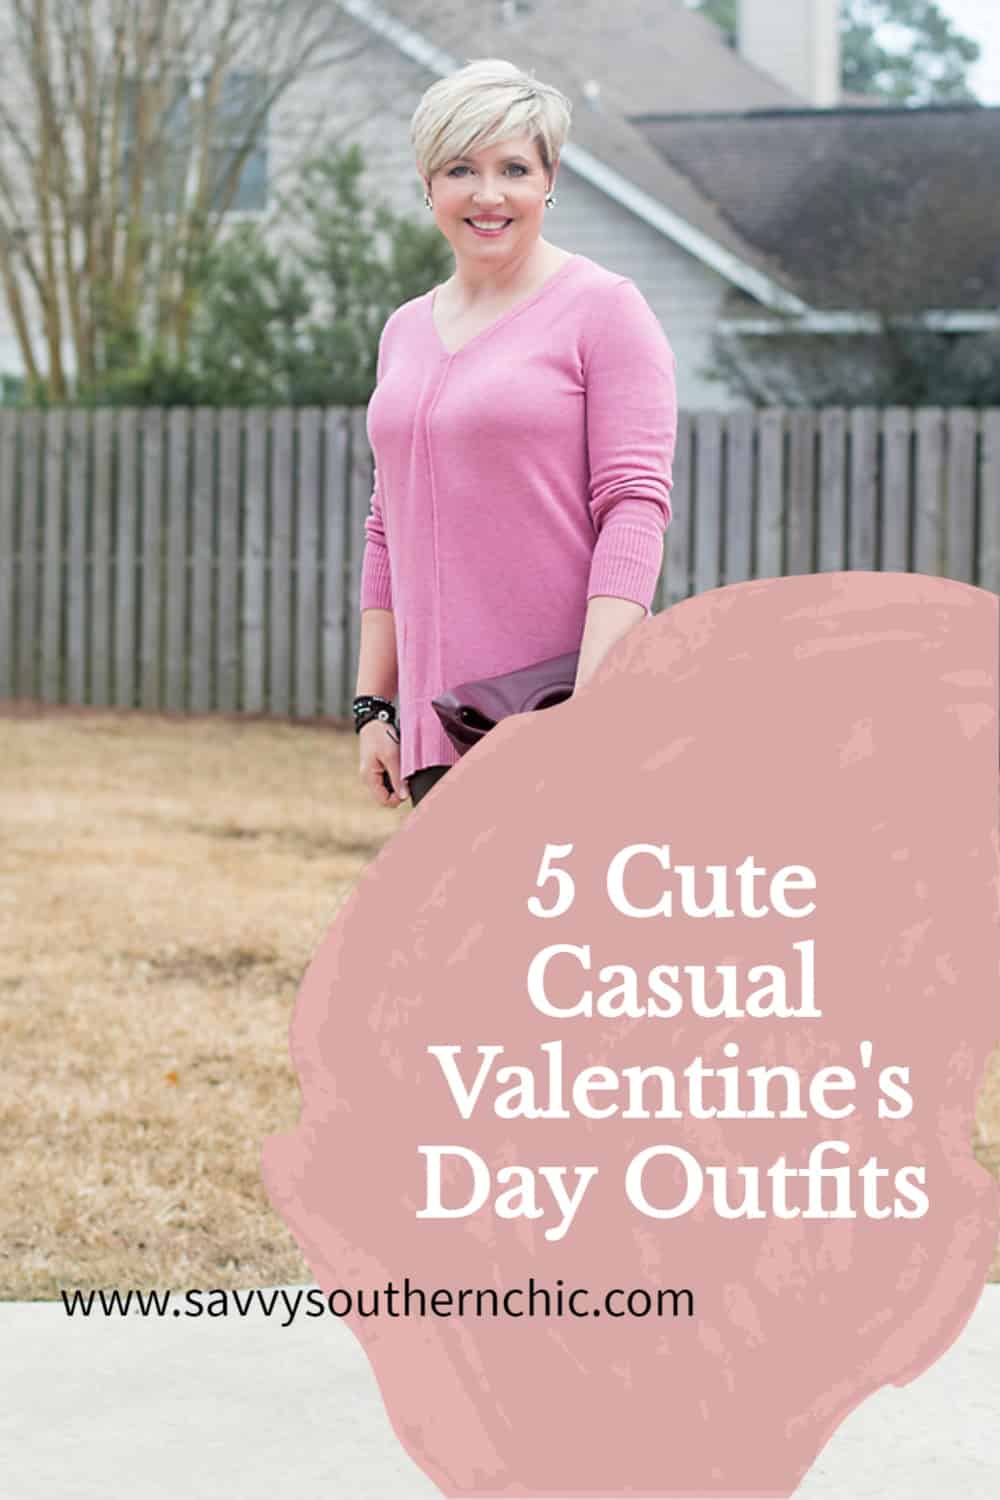 5 cute casual Valentine's Day outfits